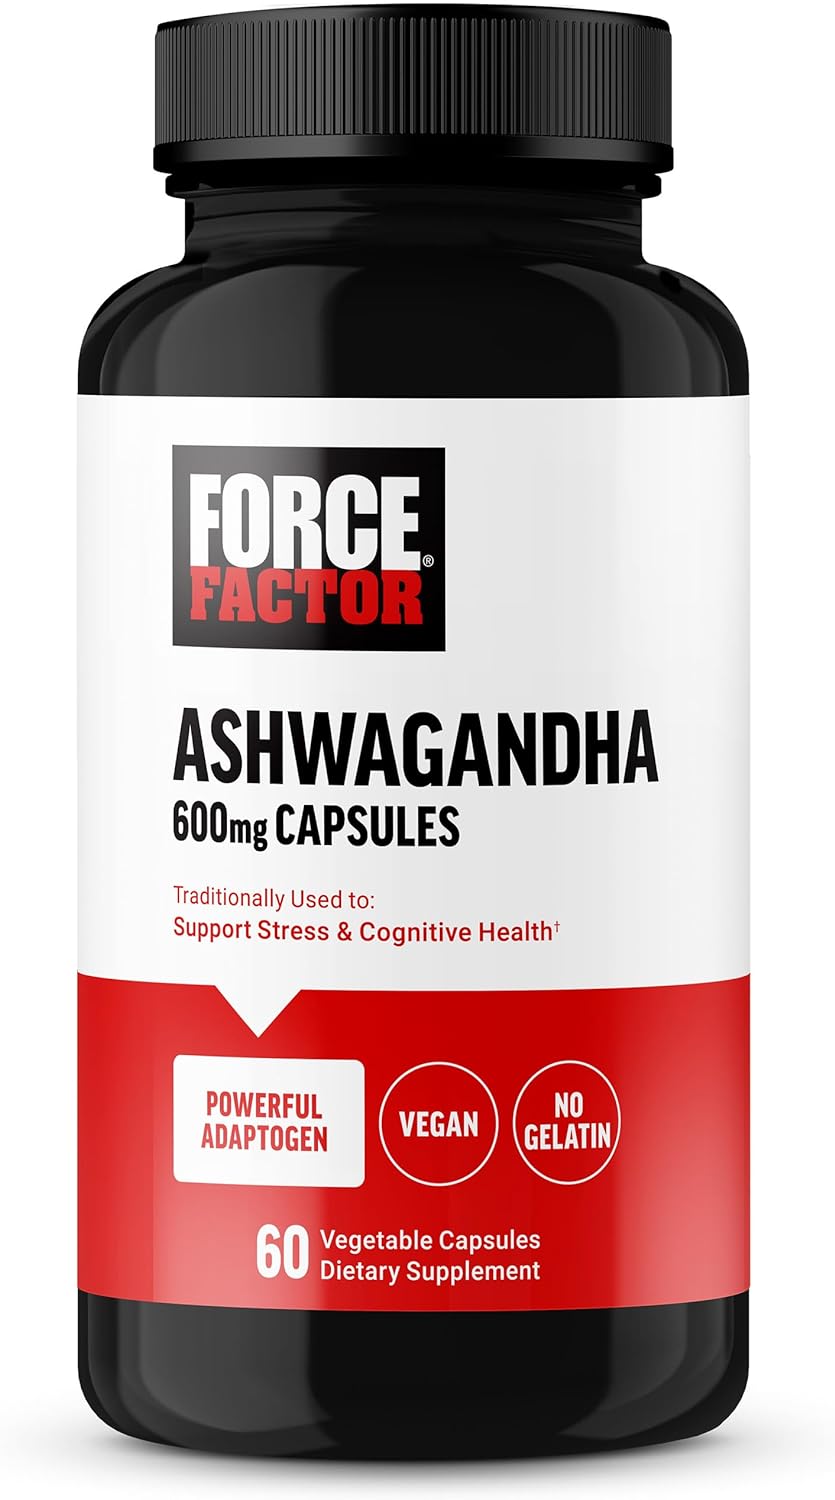 FORCE FACTOR Ashwagandha Supplements Made with Premium Vegan Ashwagandha Powder, Adaptogens to Support Stress and Cognitive Health, No Gelatin, Non-GMO, 60 Capsules